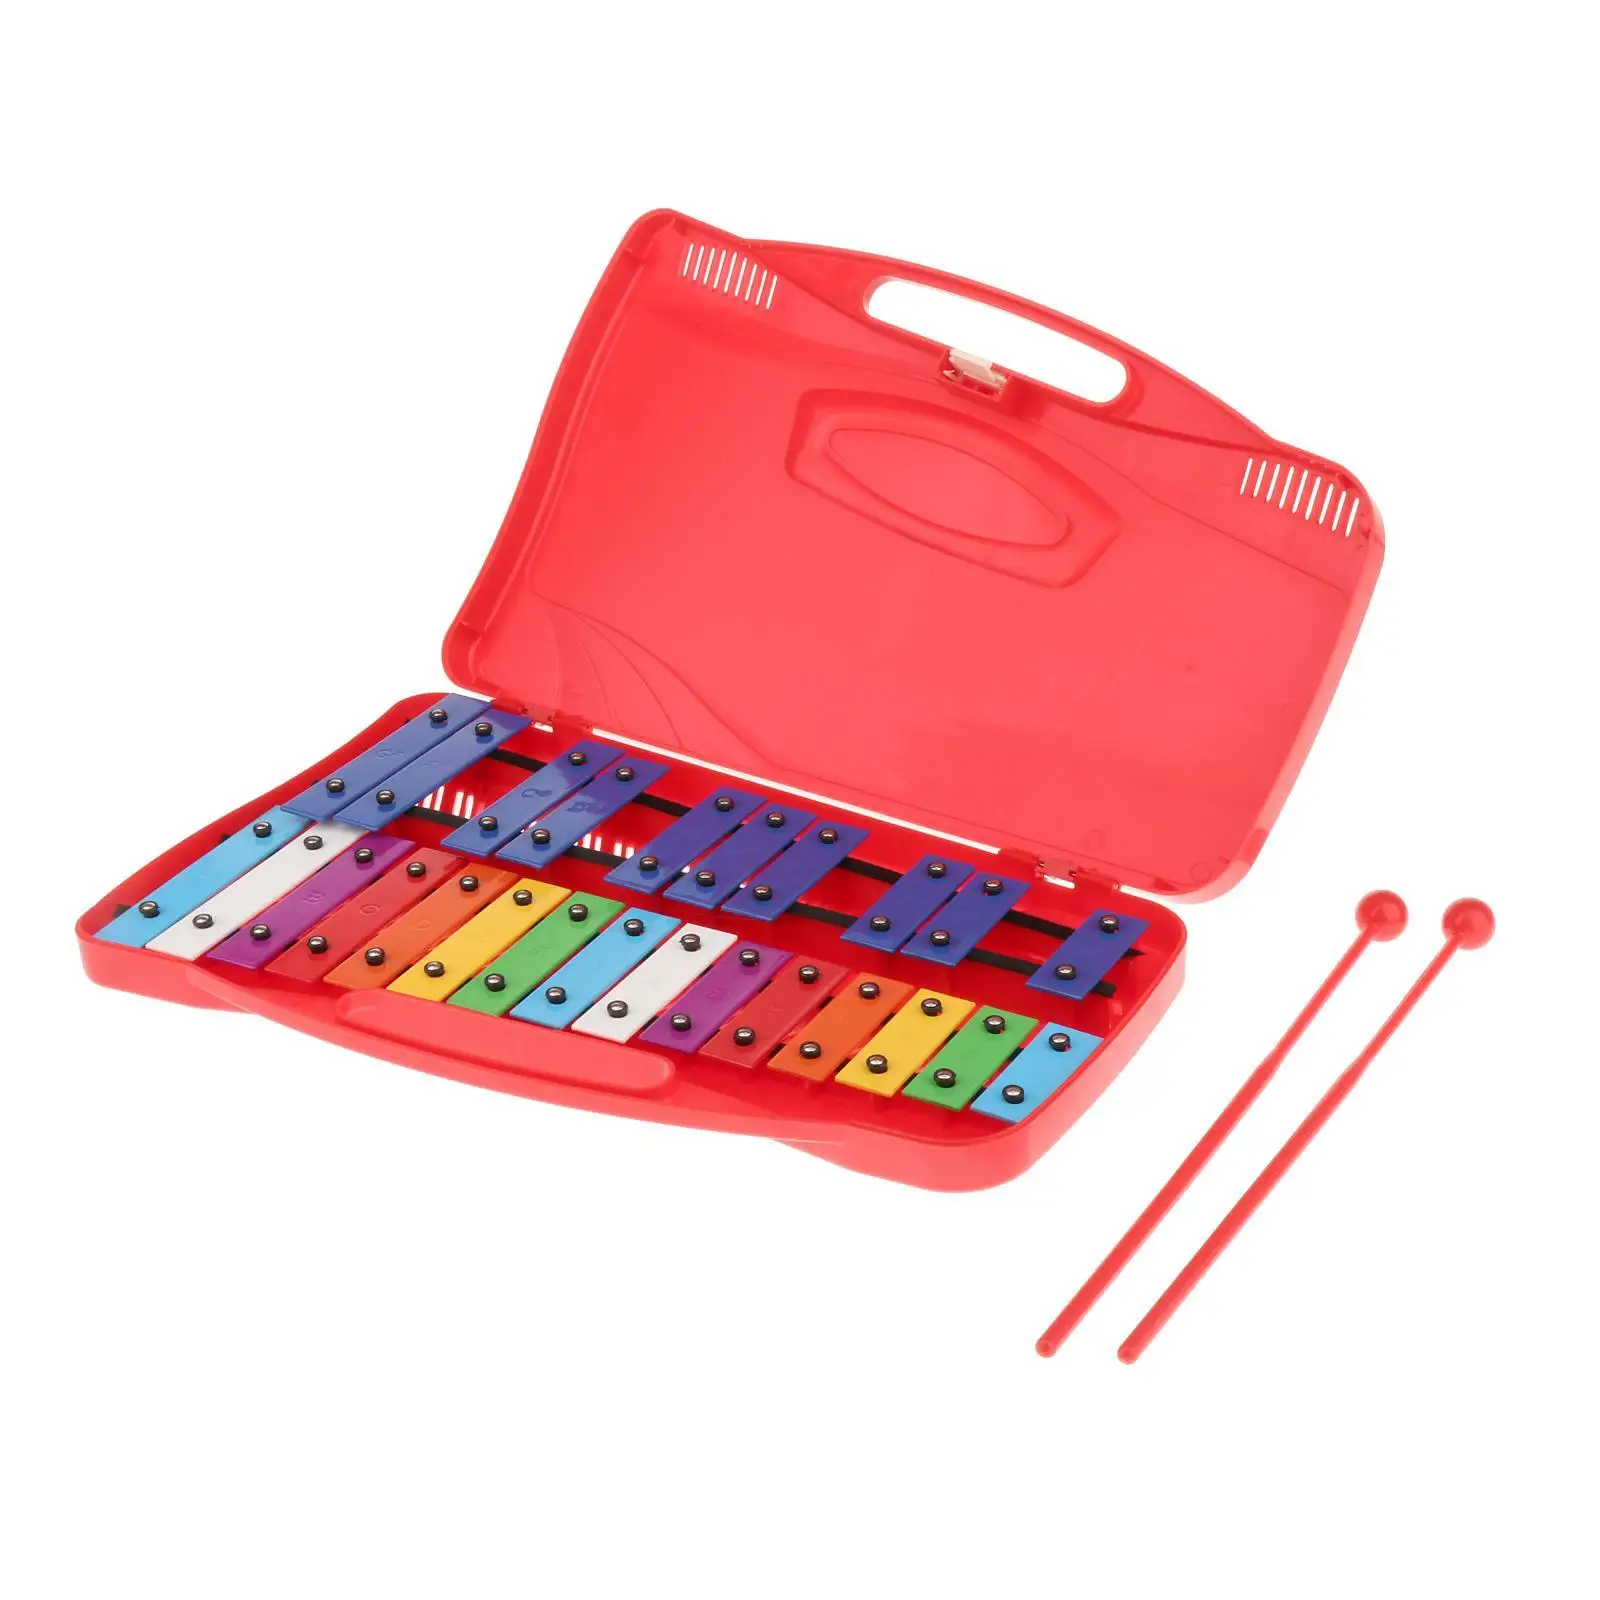 Professional 25 Note Xylophone Perfectly Tuned Glockenspiel and Two Mallets for Children Adult Baby Preschool Musical Instrument